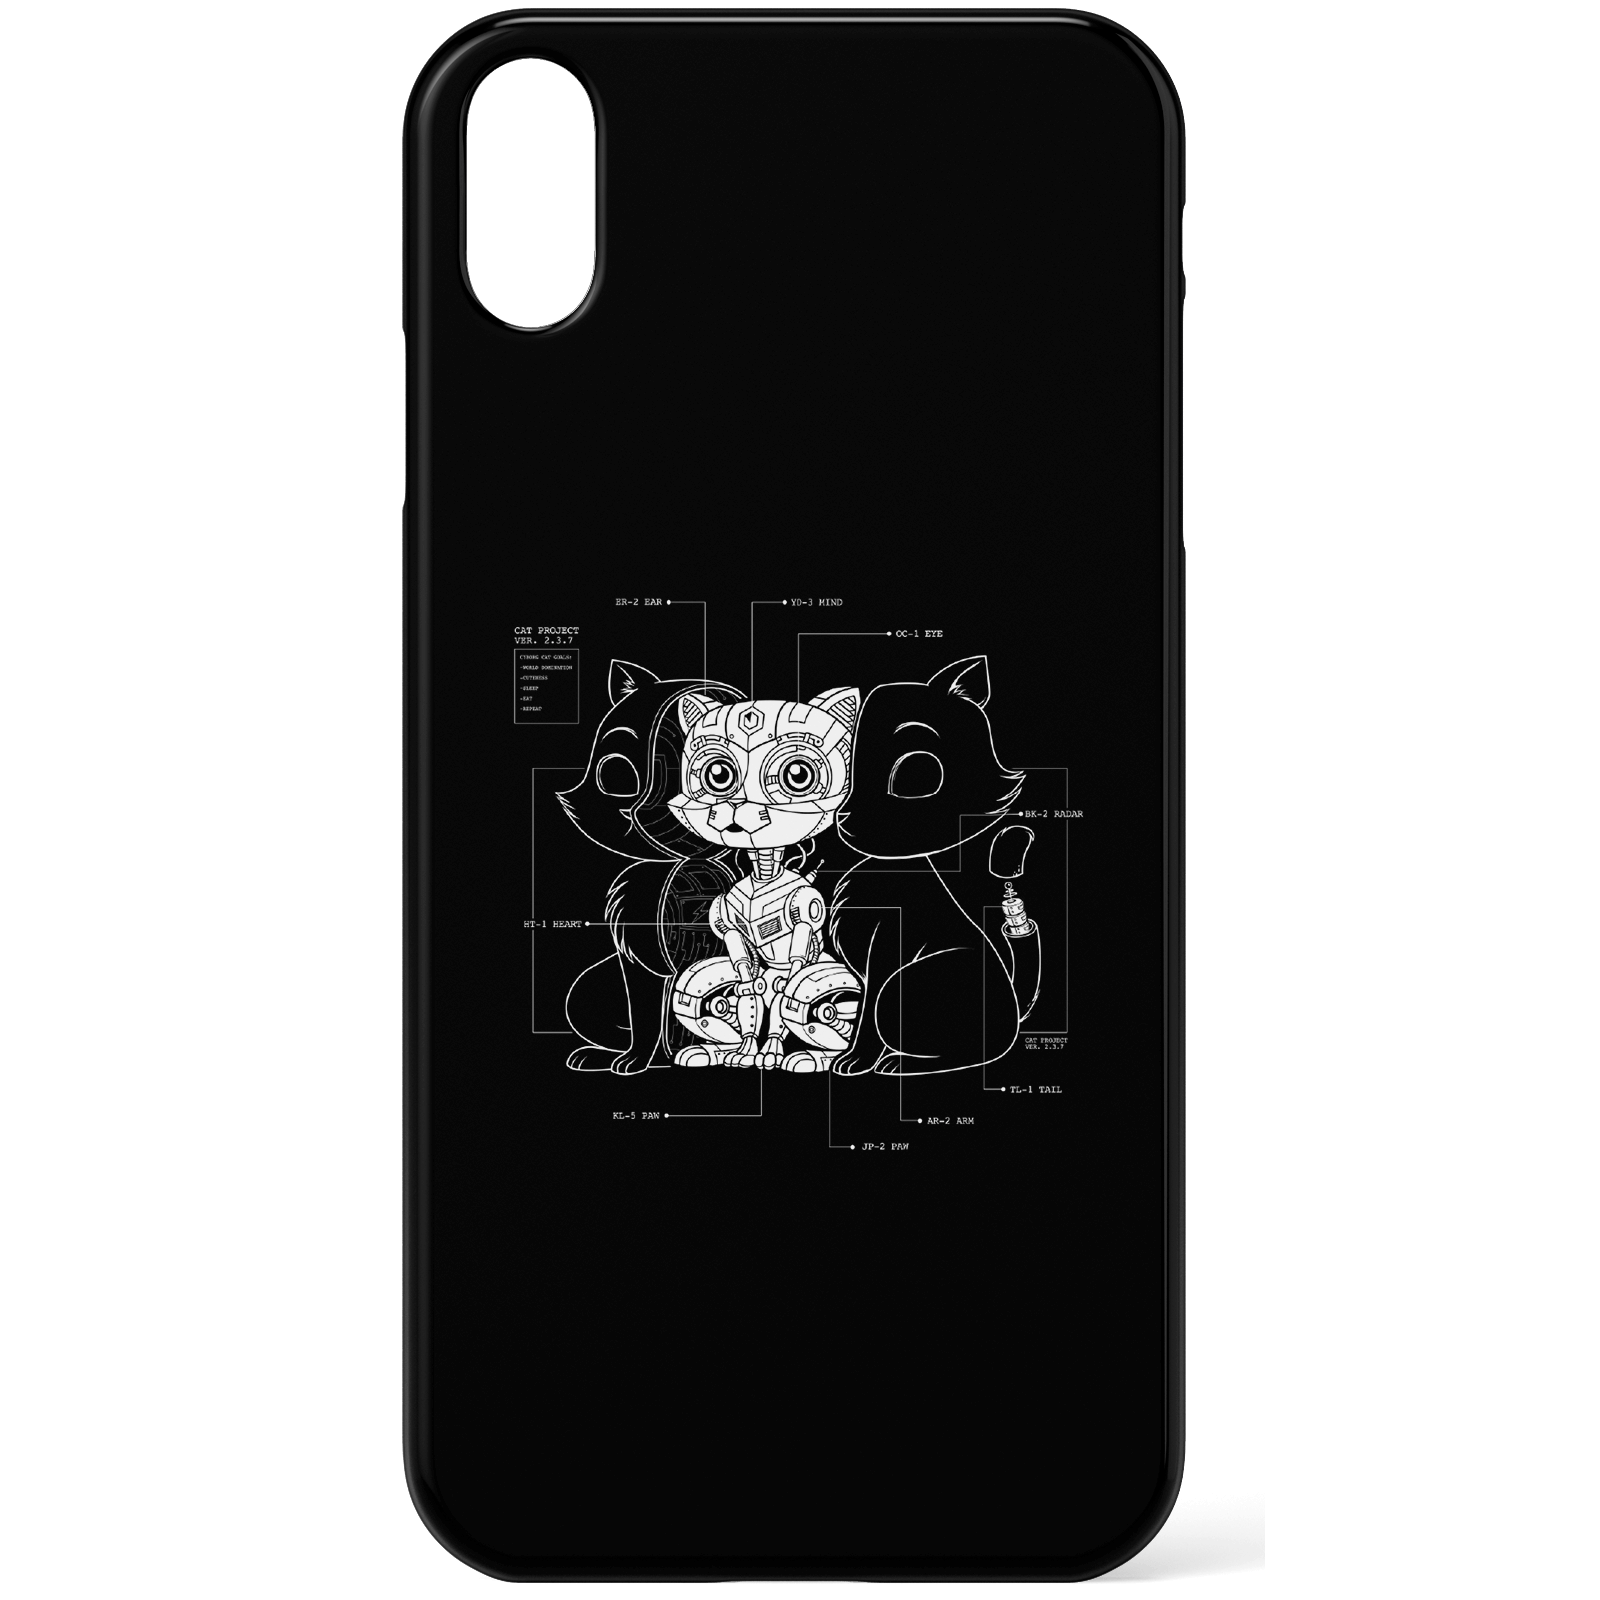 Cat Inside Phone Case for iPhone and Android - iPhone XS - Snap Case - Matte